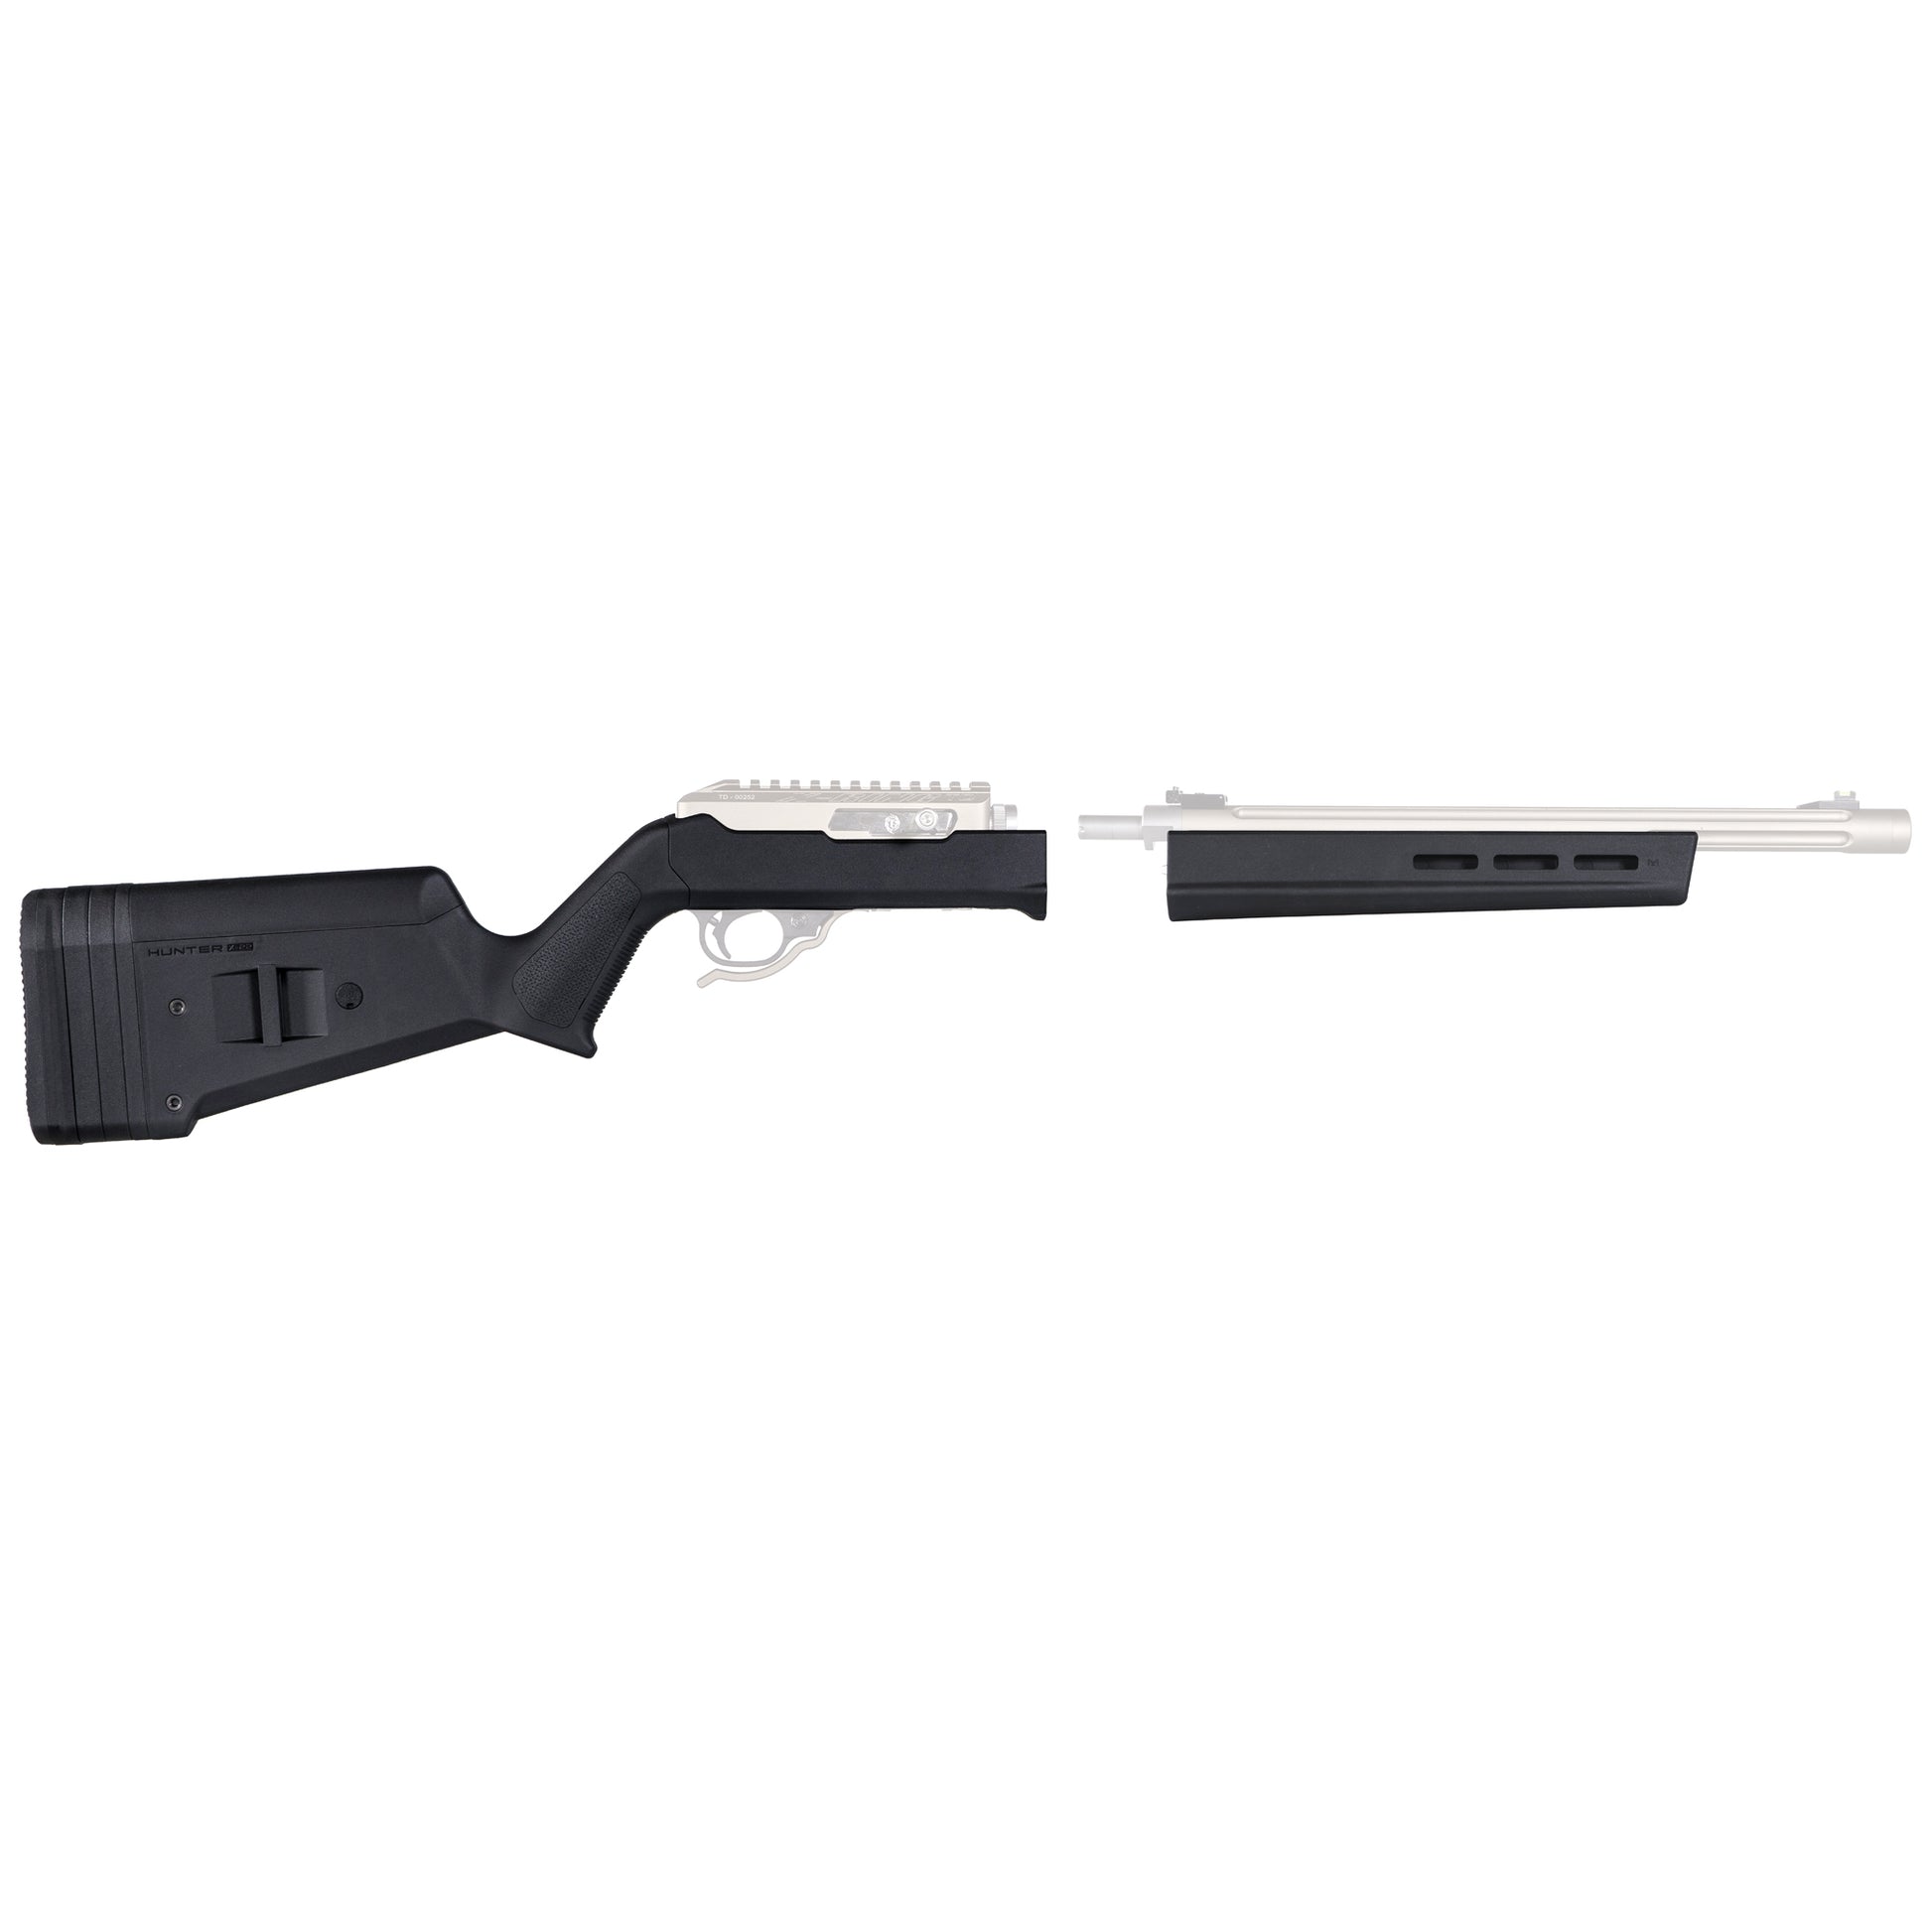 Magpul Industries Hunter X22 Takedown Stock Fits Ruger 10/22 Takedown MAG760-BLK - California Shooting Supplies